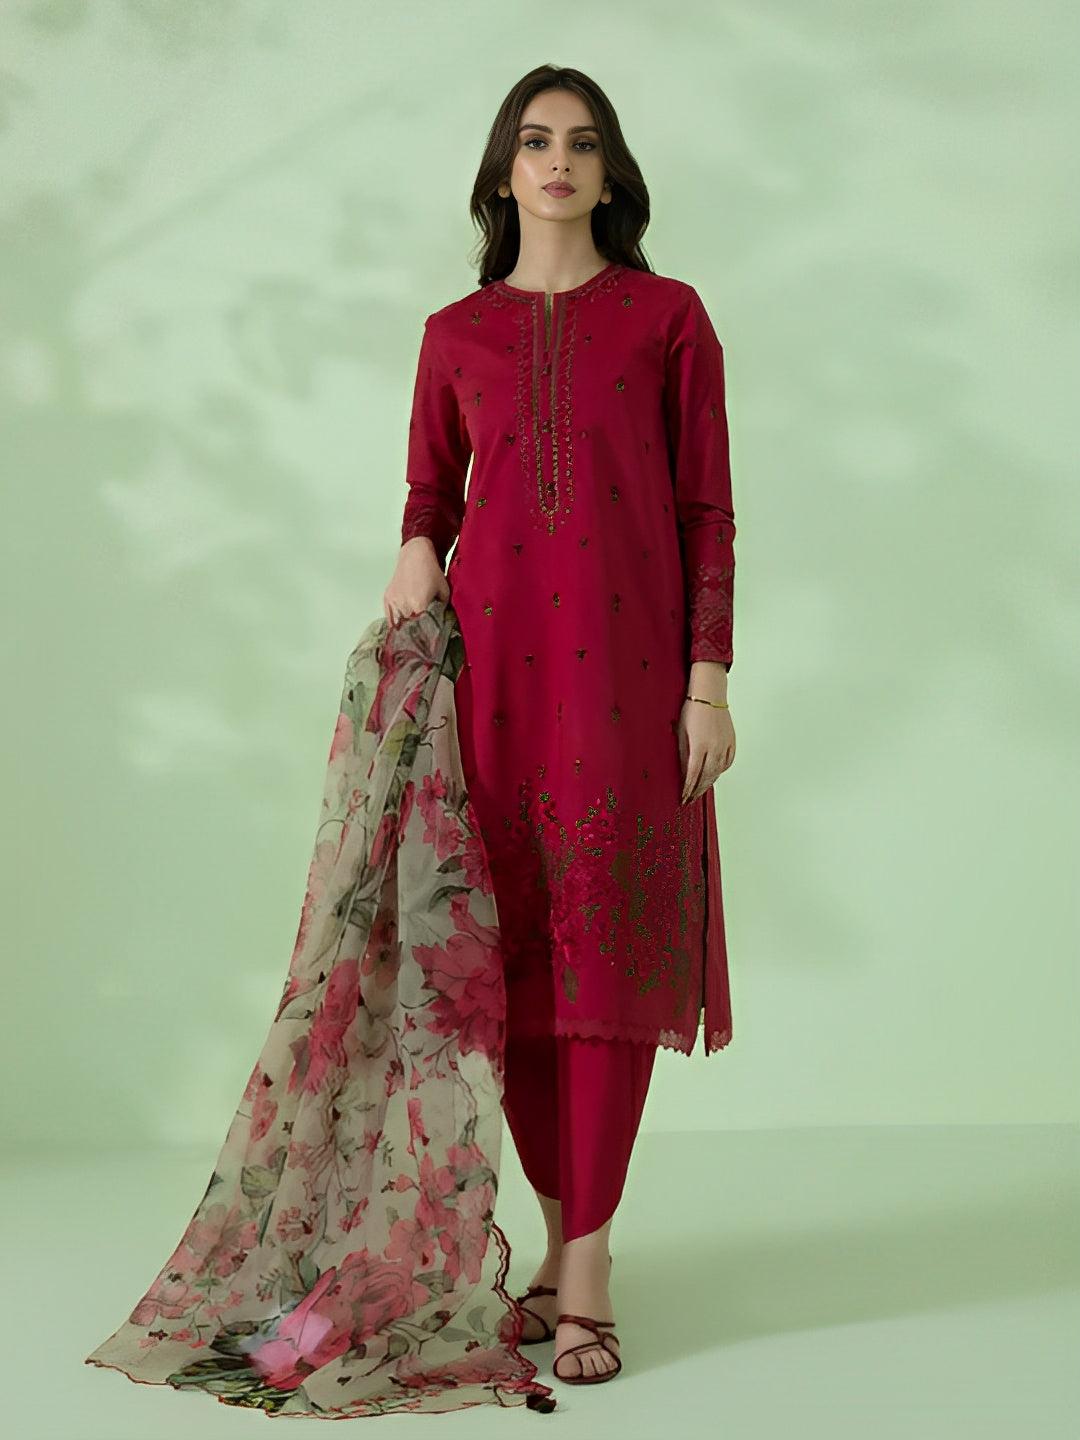 Buy Red Full Sleeves Printed Linen Shirt for Girls on Sapphire sale in  Pakistan